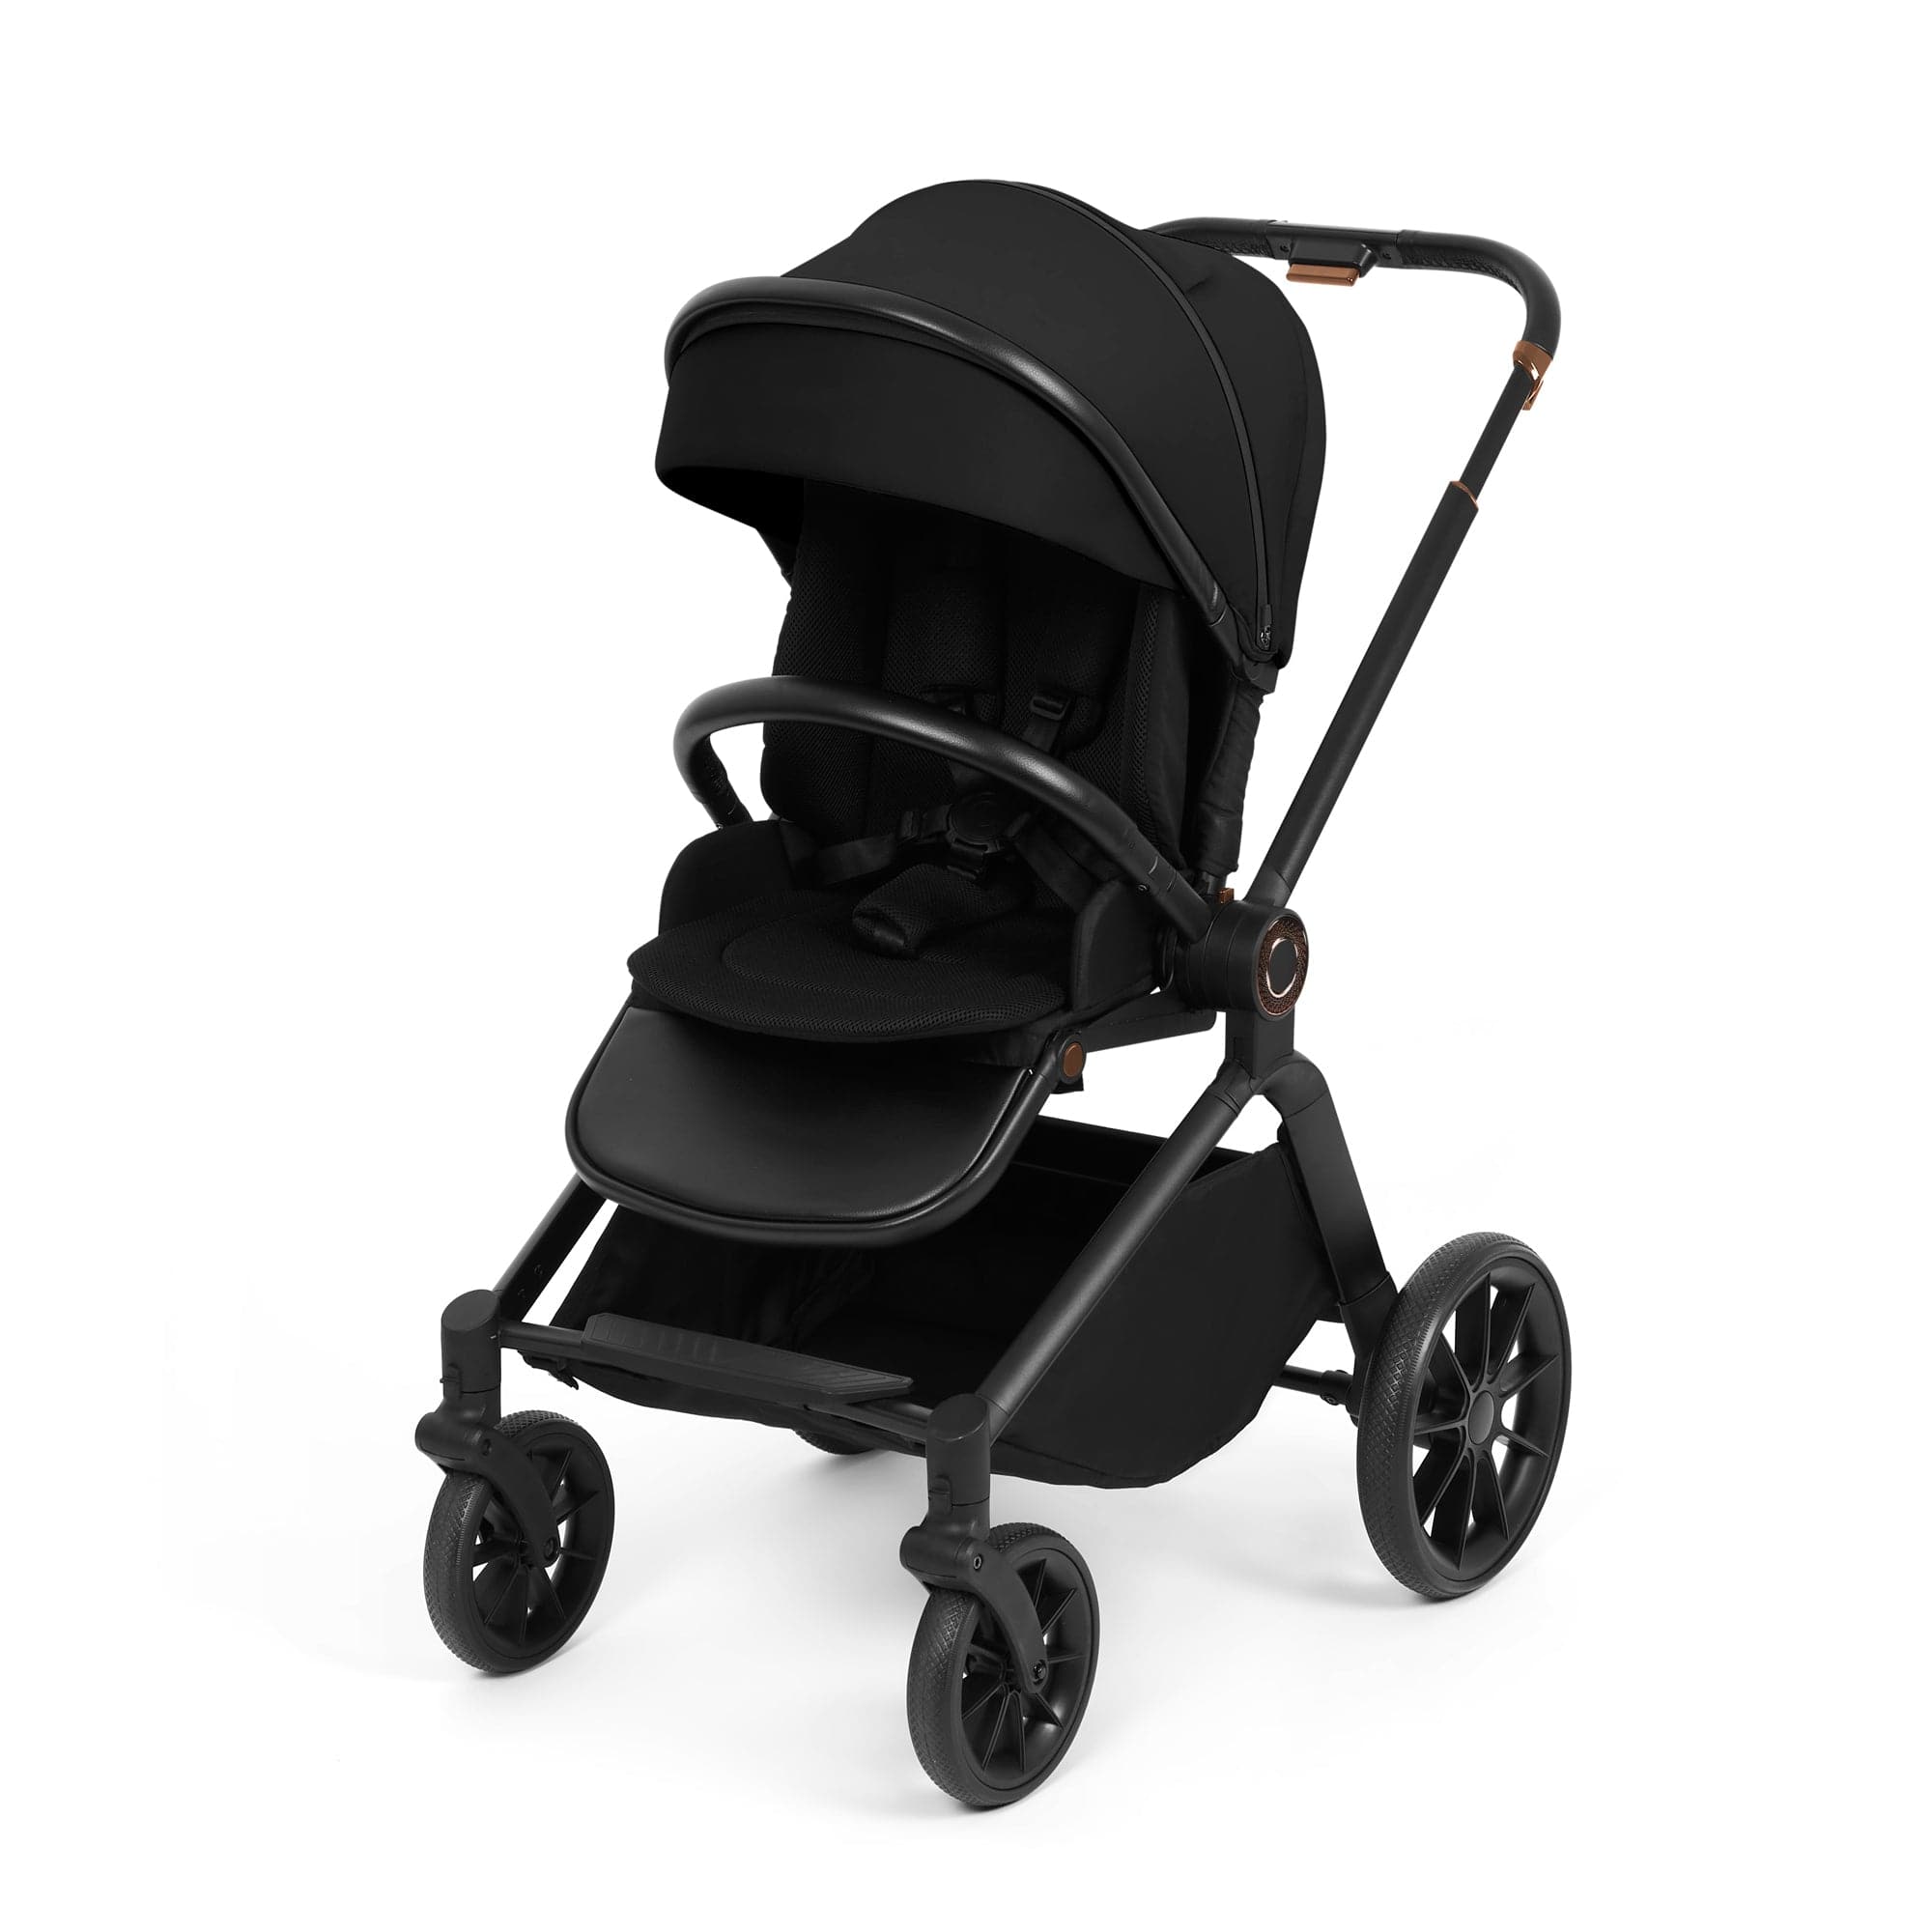 Ickle Bubba Pushchairs & Buggies ALTIMA 2 IN 1 - BLACK 10-012-000-001